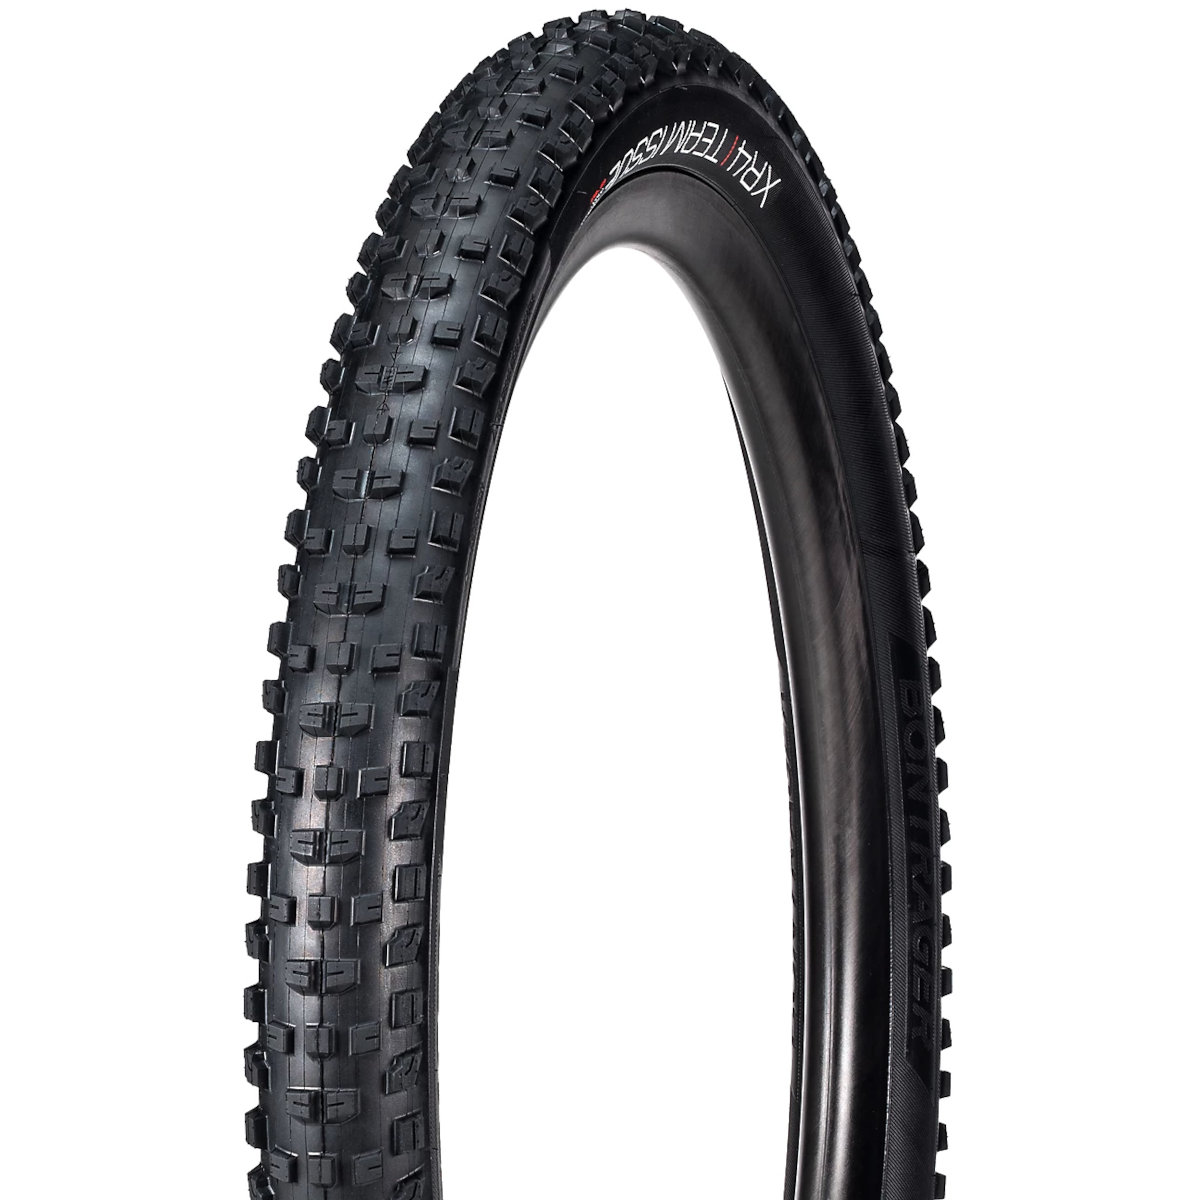 Picture of Bontrager XR4 Team Issue TLR Folding Tire - 27.5x2.6 Inches